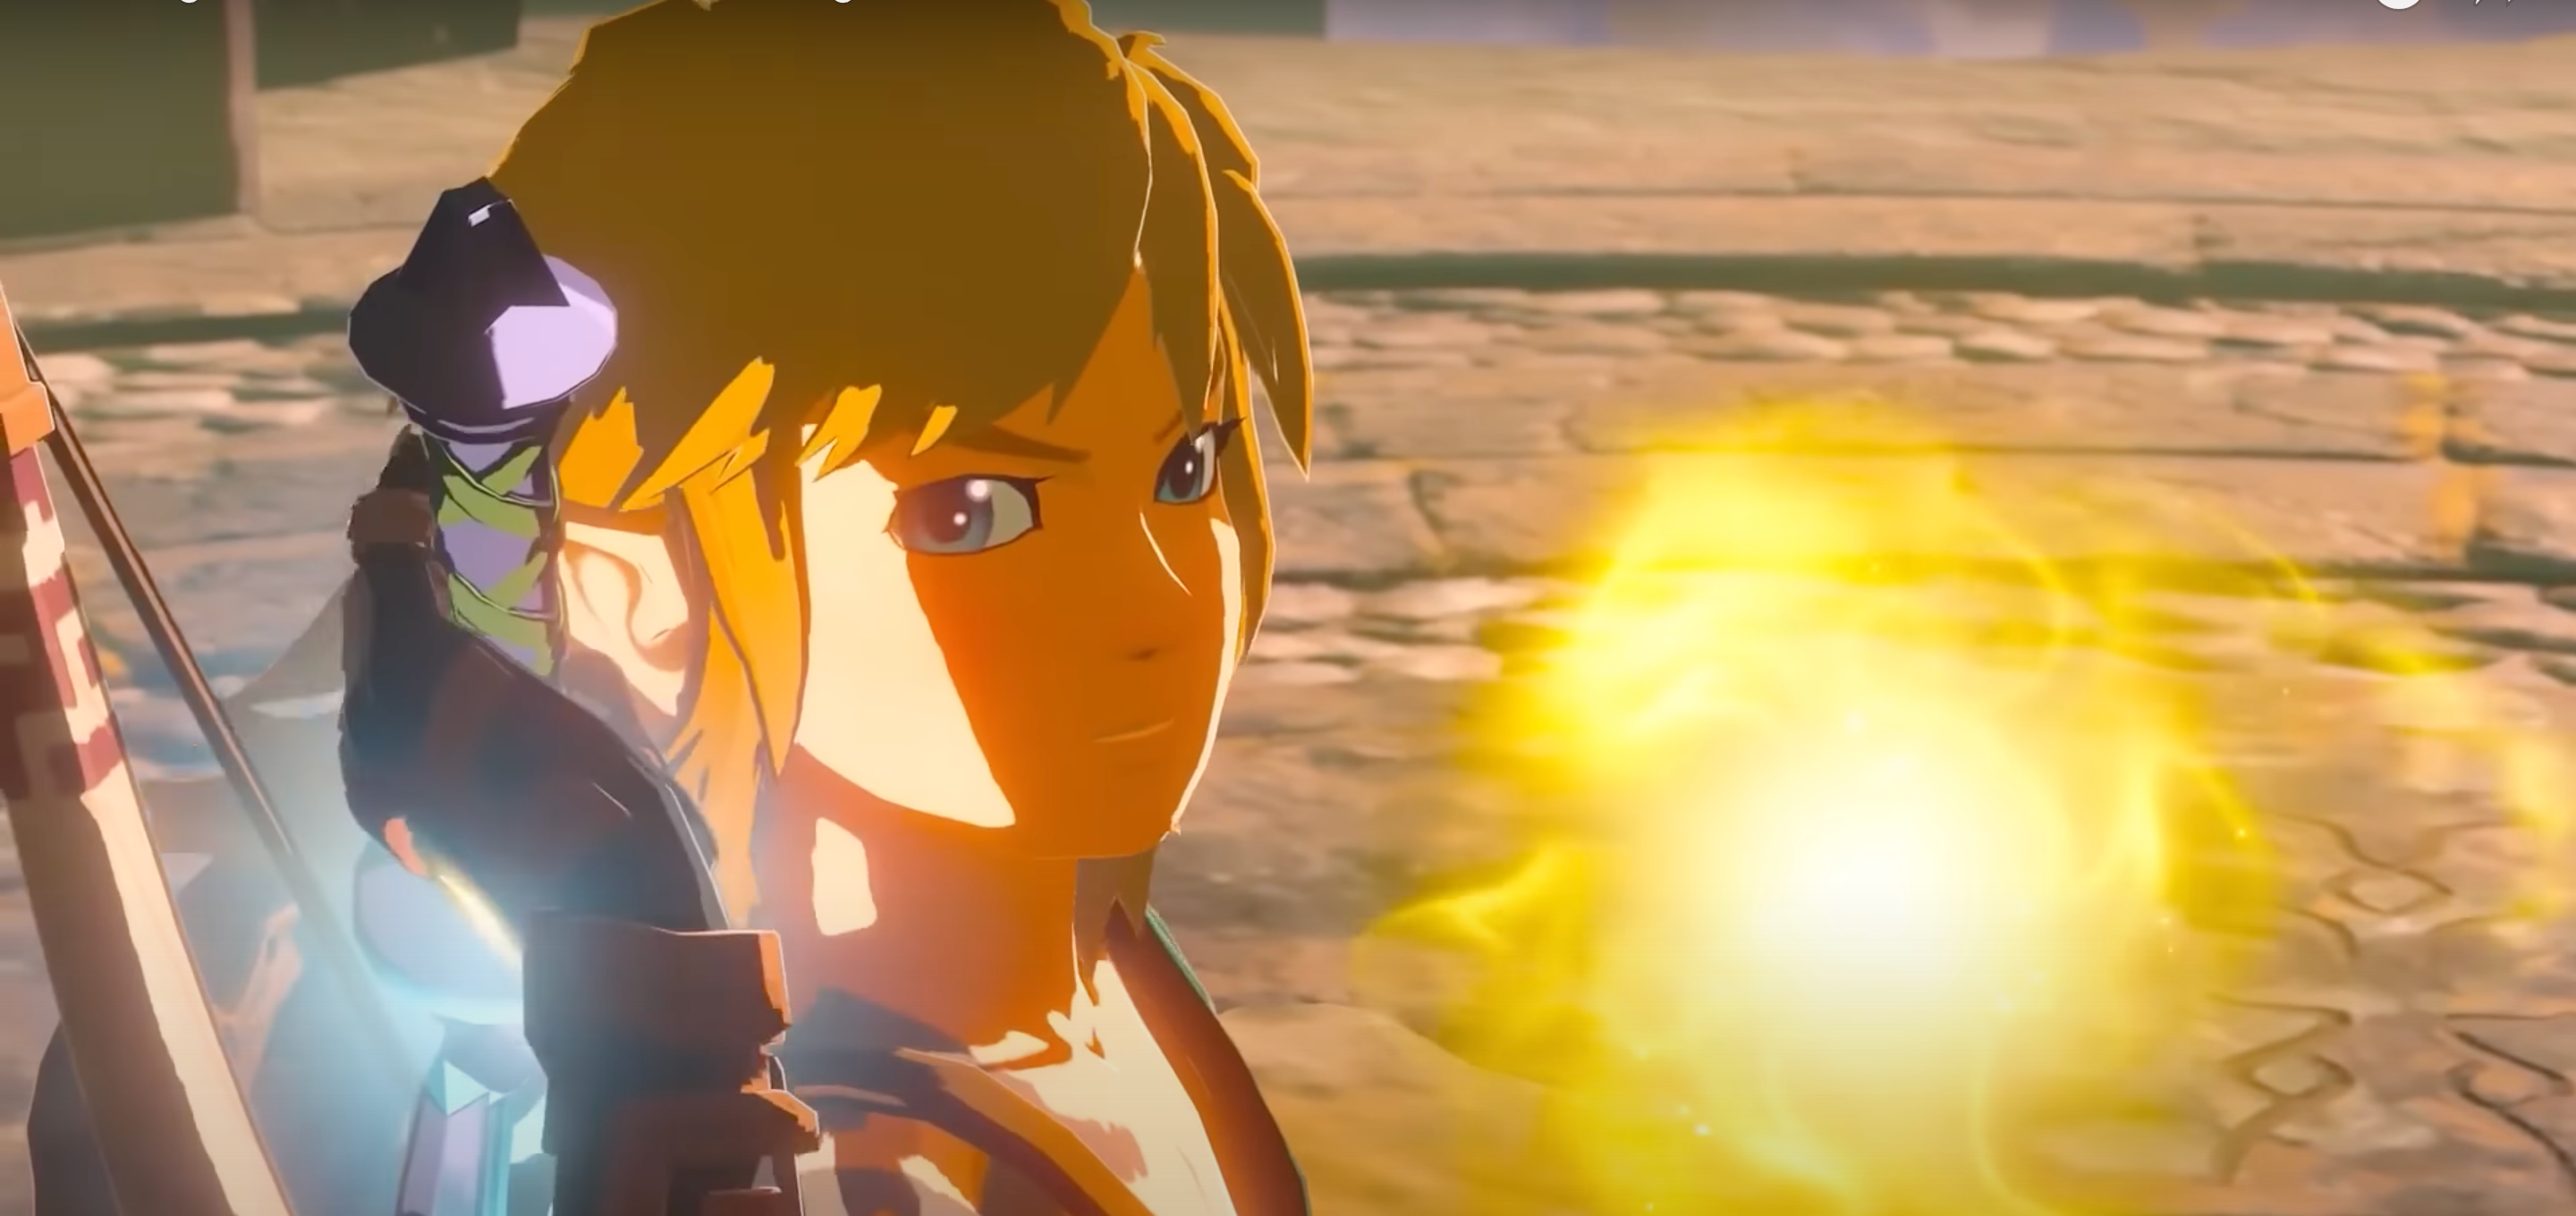 Image of Link holding the Master Sword in the trailer for The Legend of Zelda: Tears of the Kingdom.